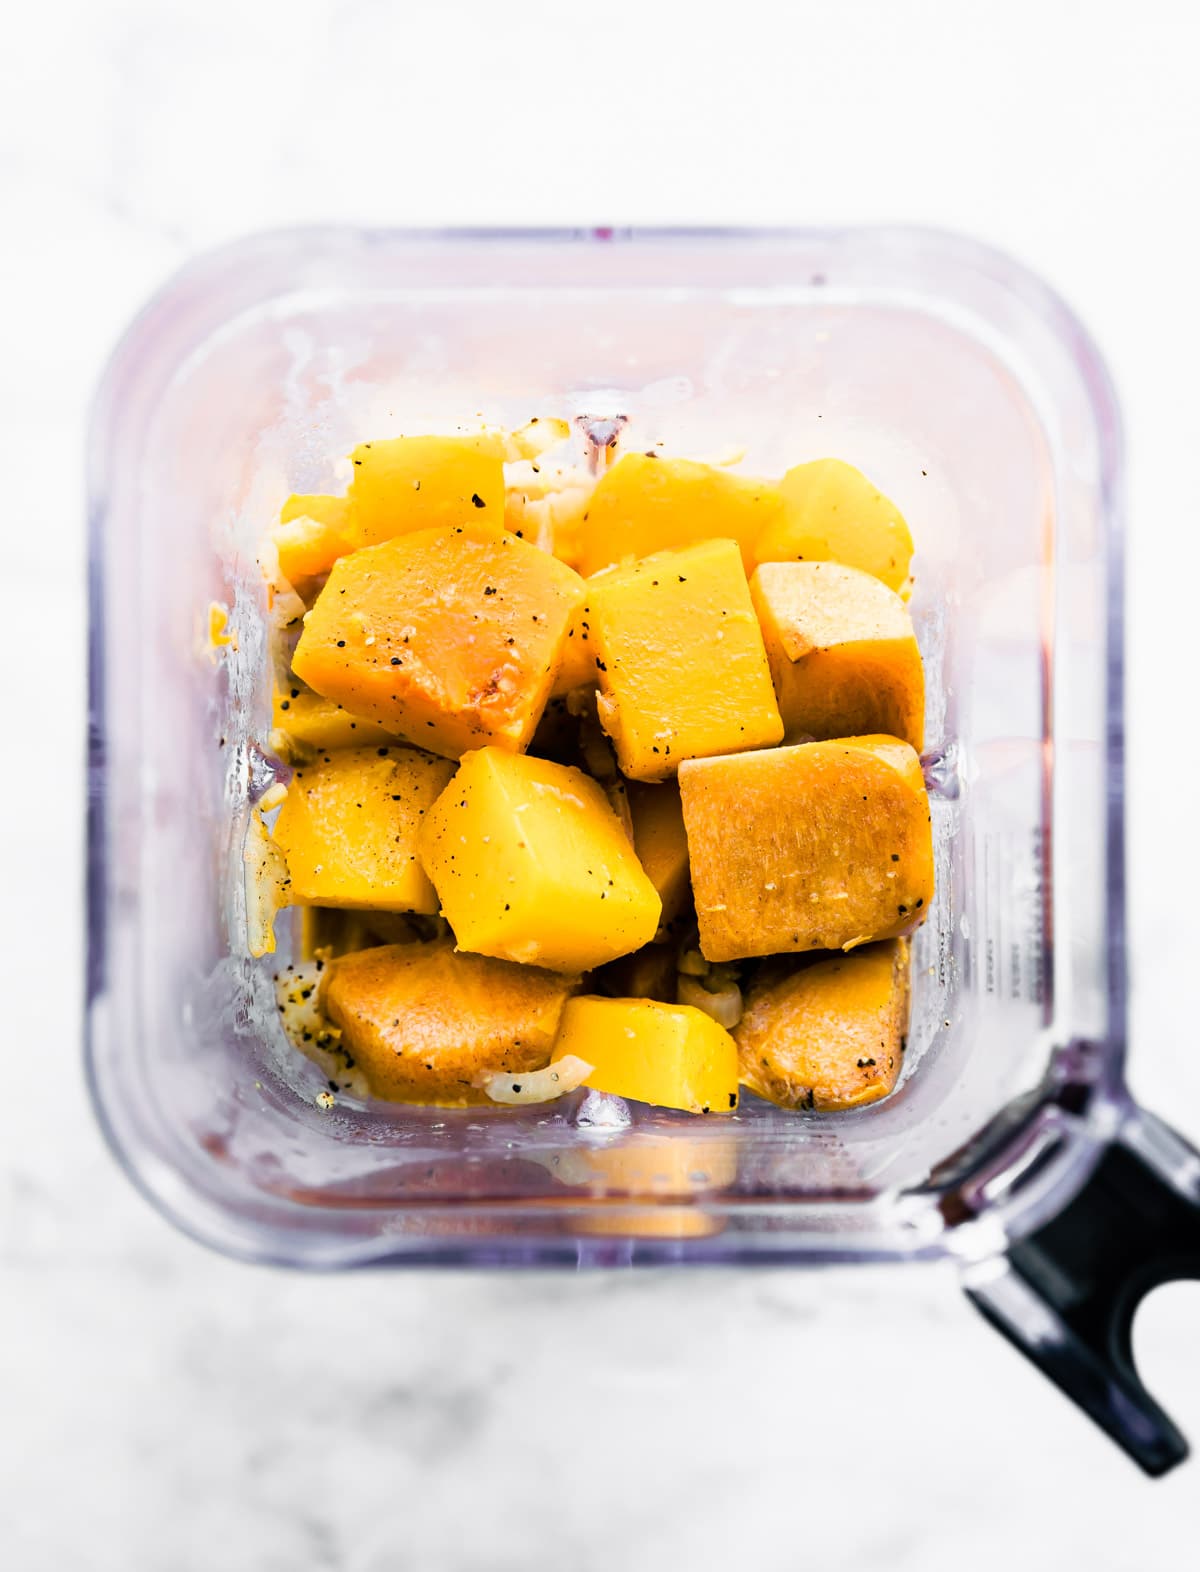 Overhead view blender cup filled with roasted butternut squash pieces